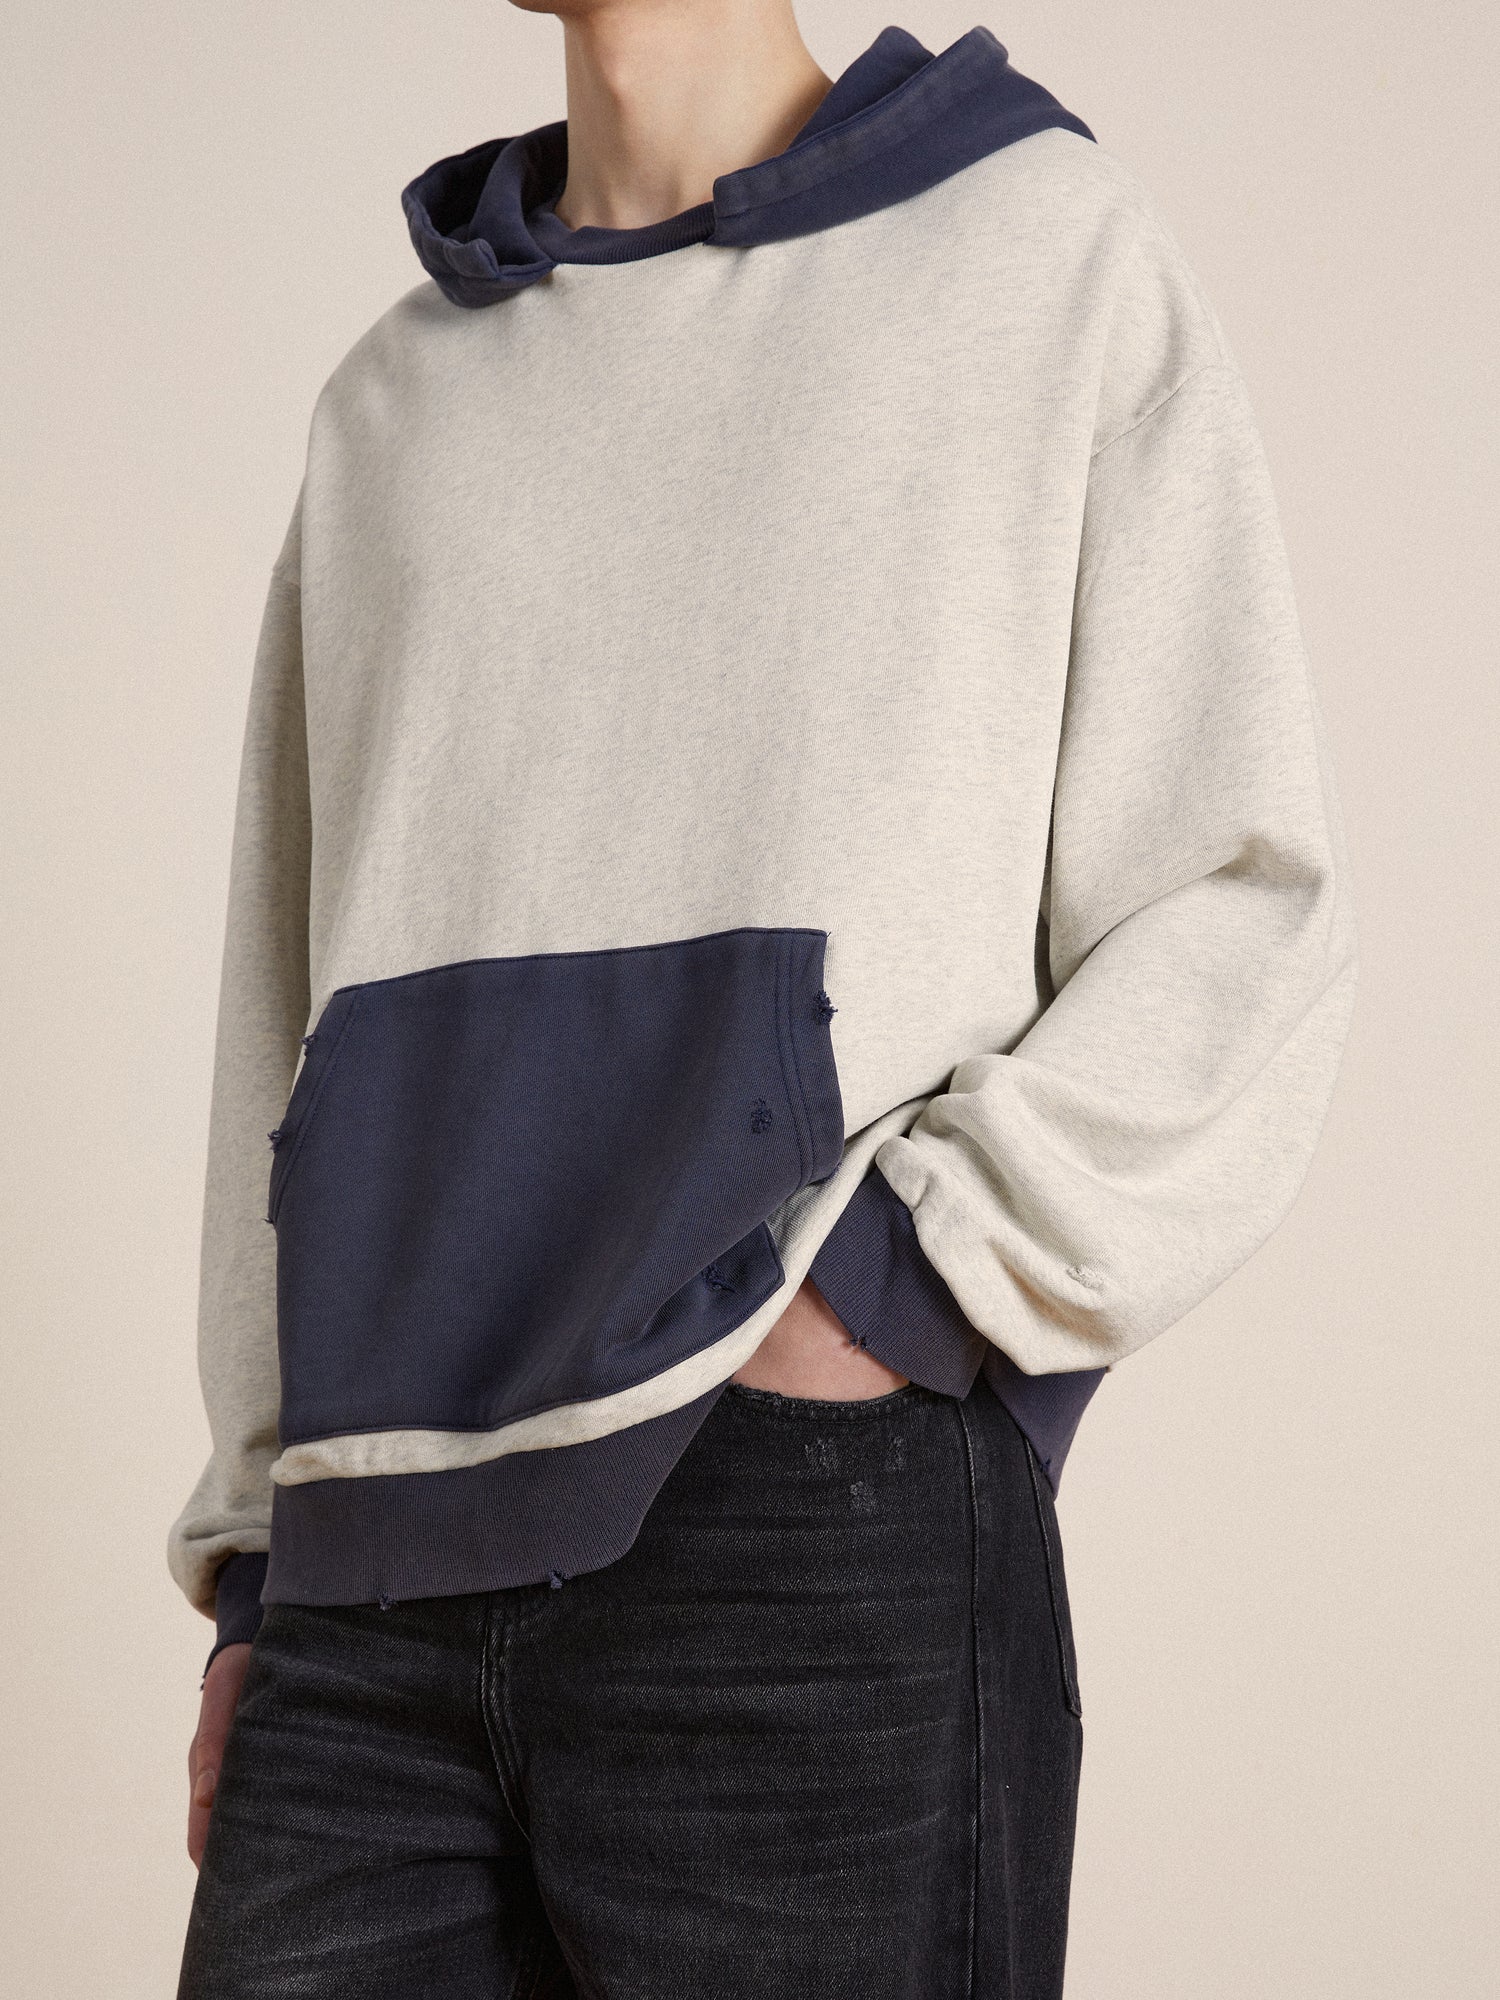 The model is wearing a Found two-tone hoodie with vintage nostalgia.